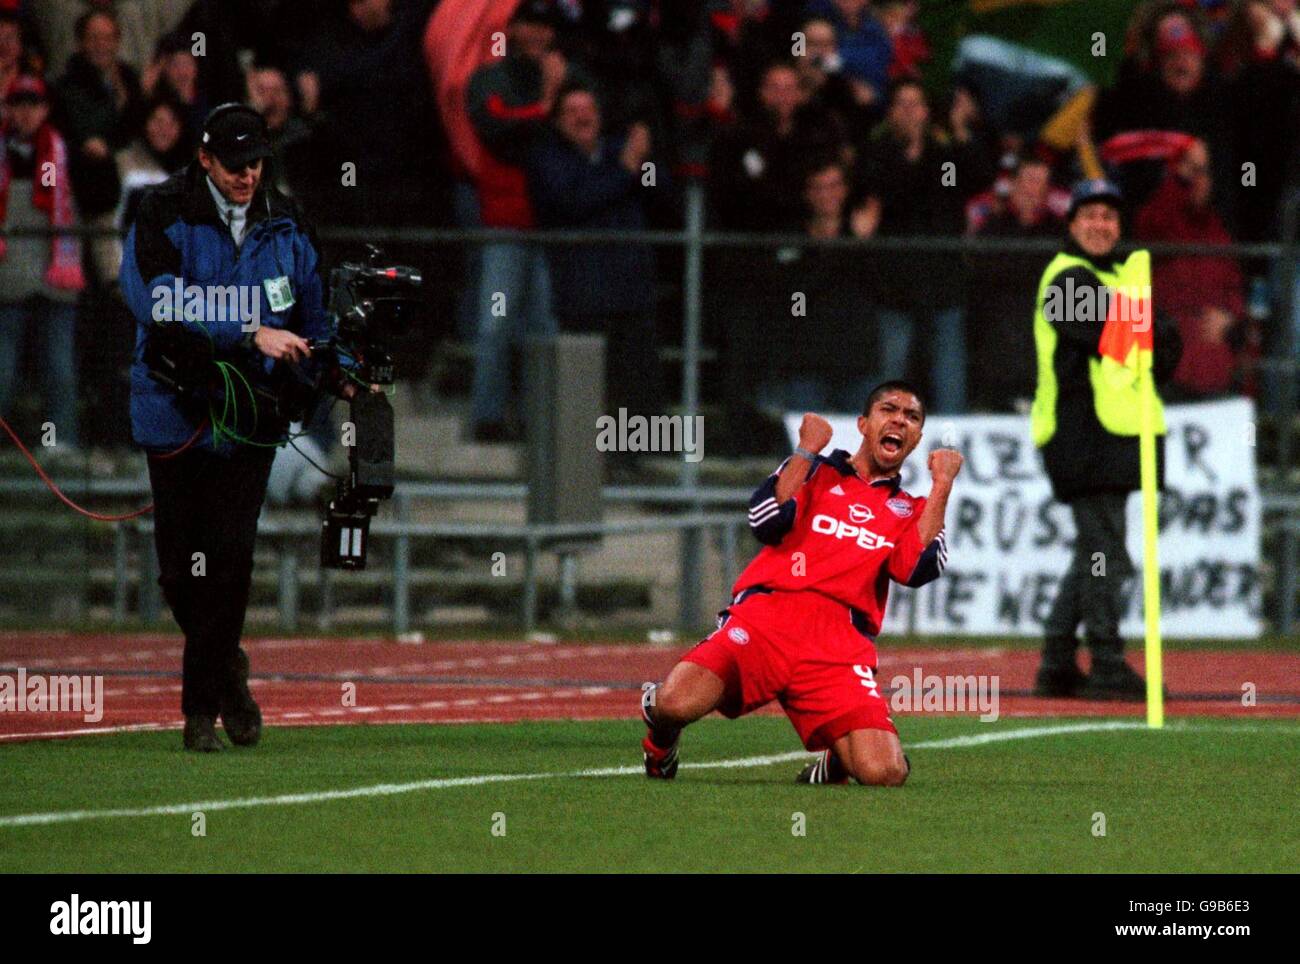 A television cameraman films Bayern Munich's Giovane Elber as he celebrates scoring their second goal Stock Photo